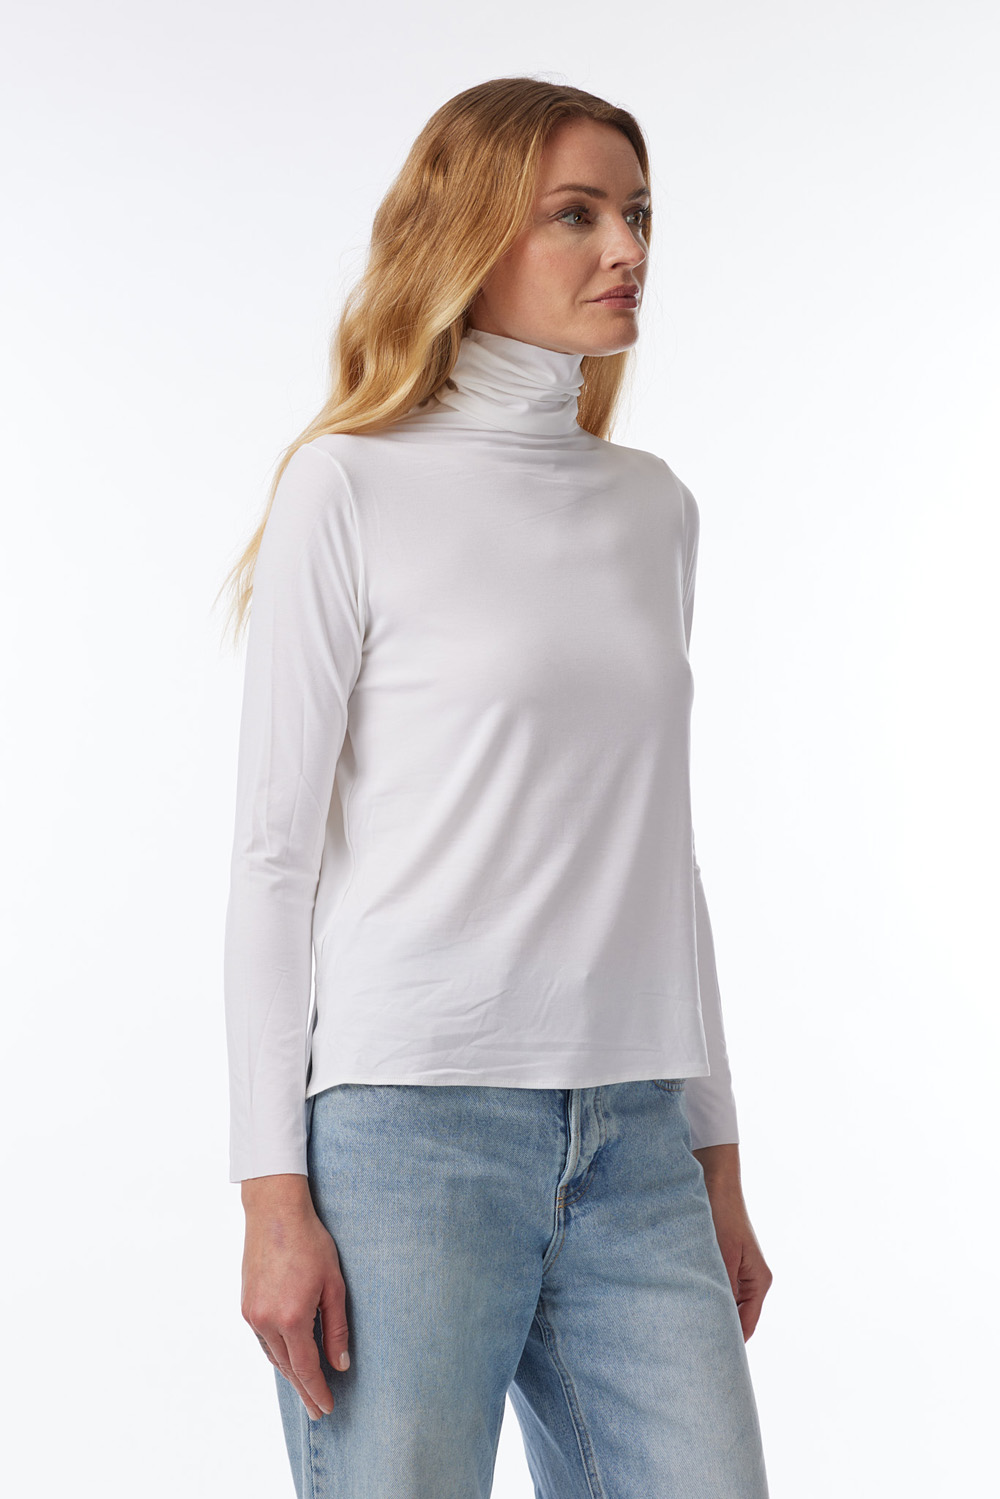 turtle neck t-shirt in viscose stretch, long sleeves